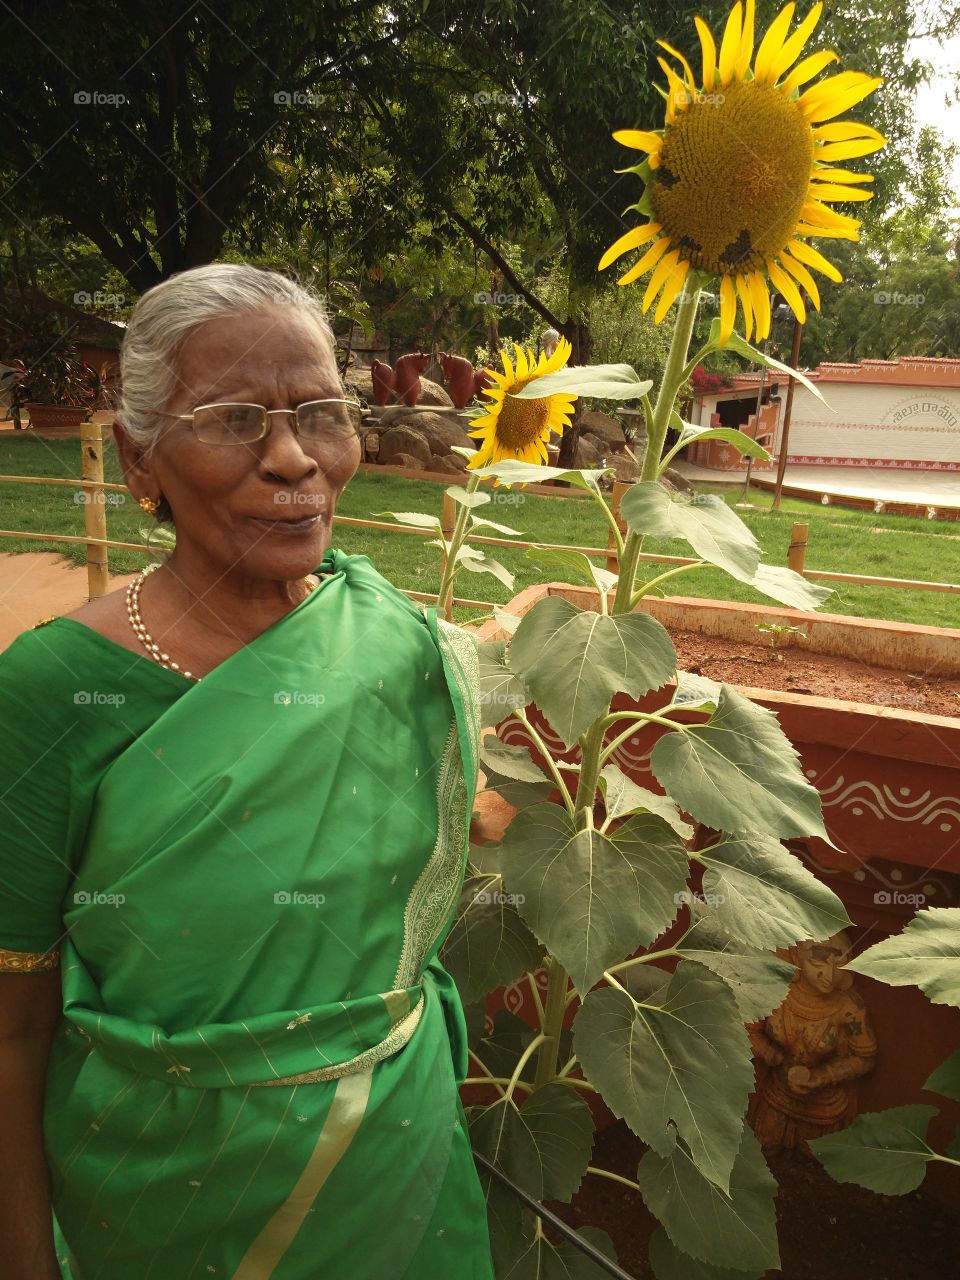 indian tradetional woman standing at the sunflower tree.